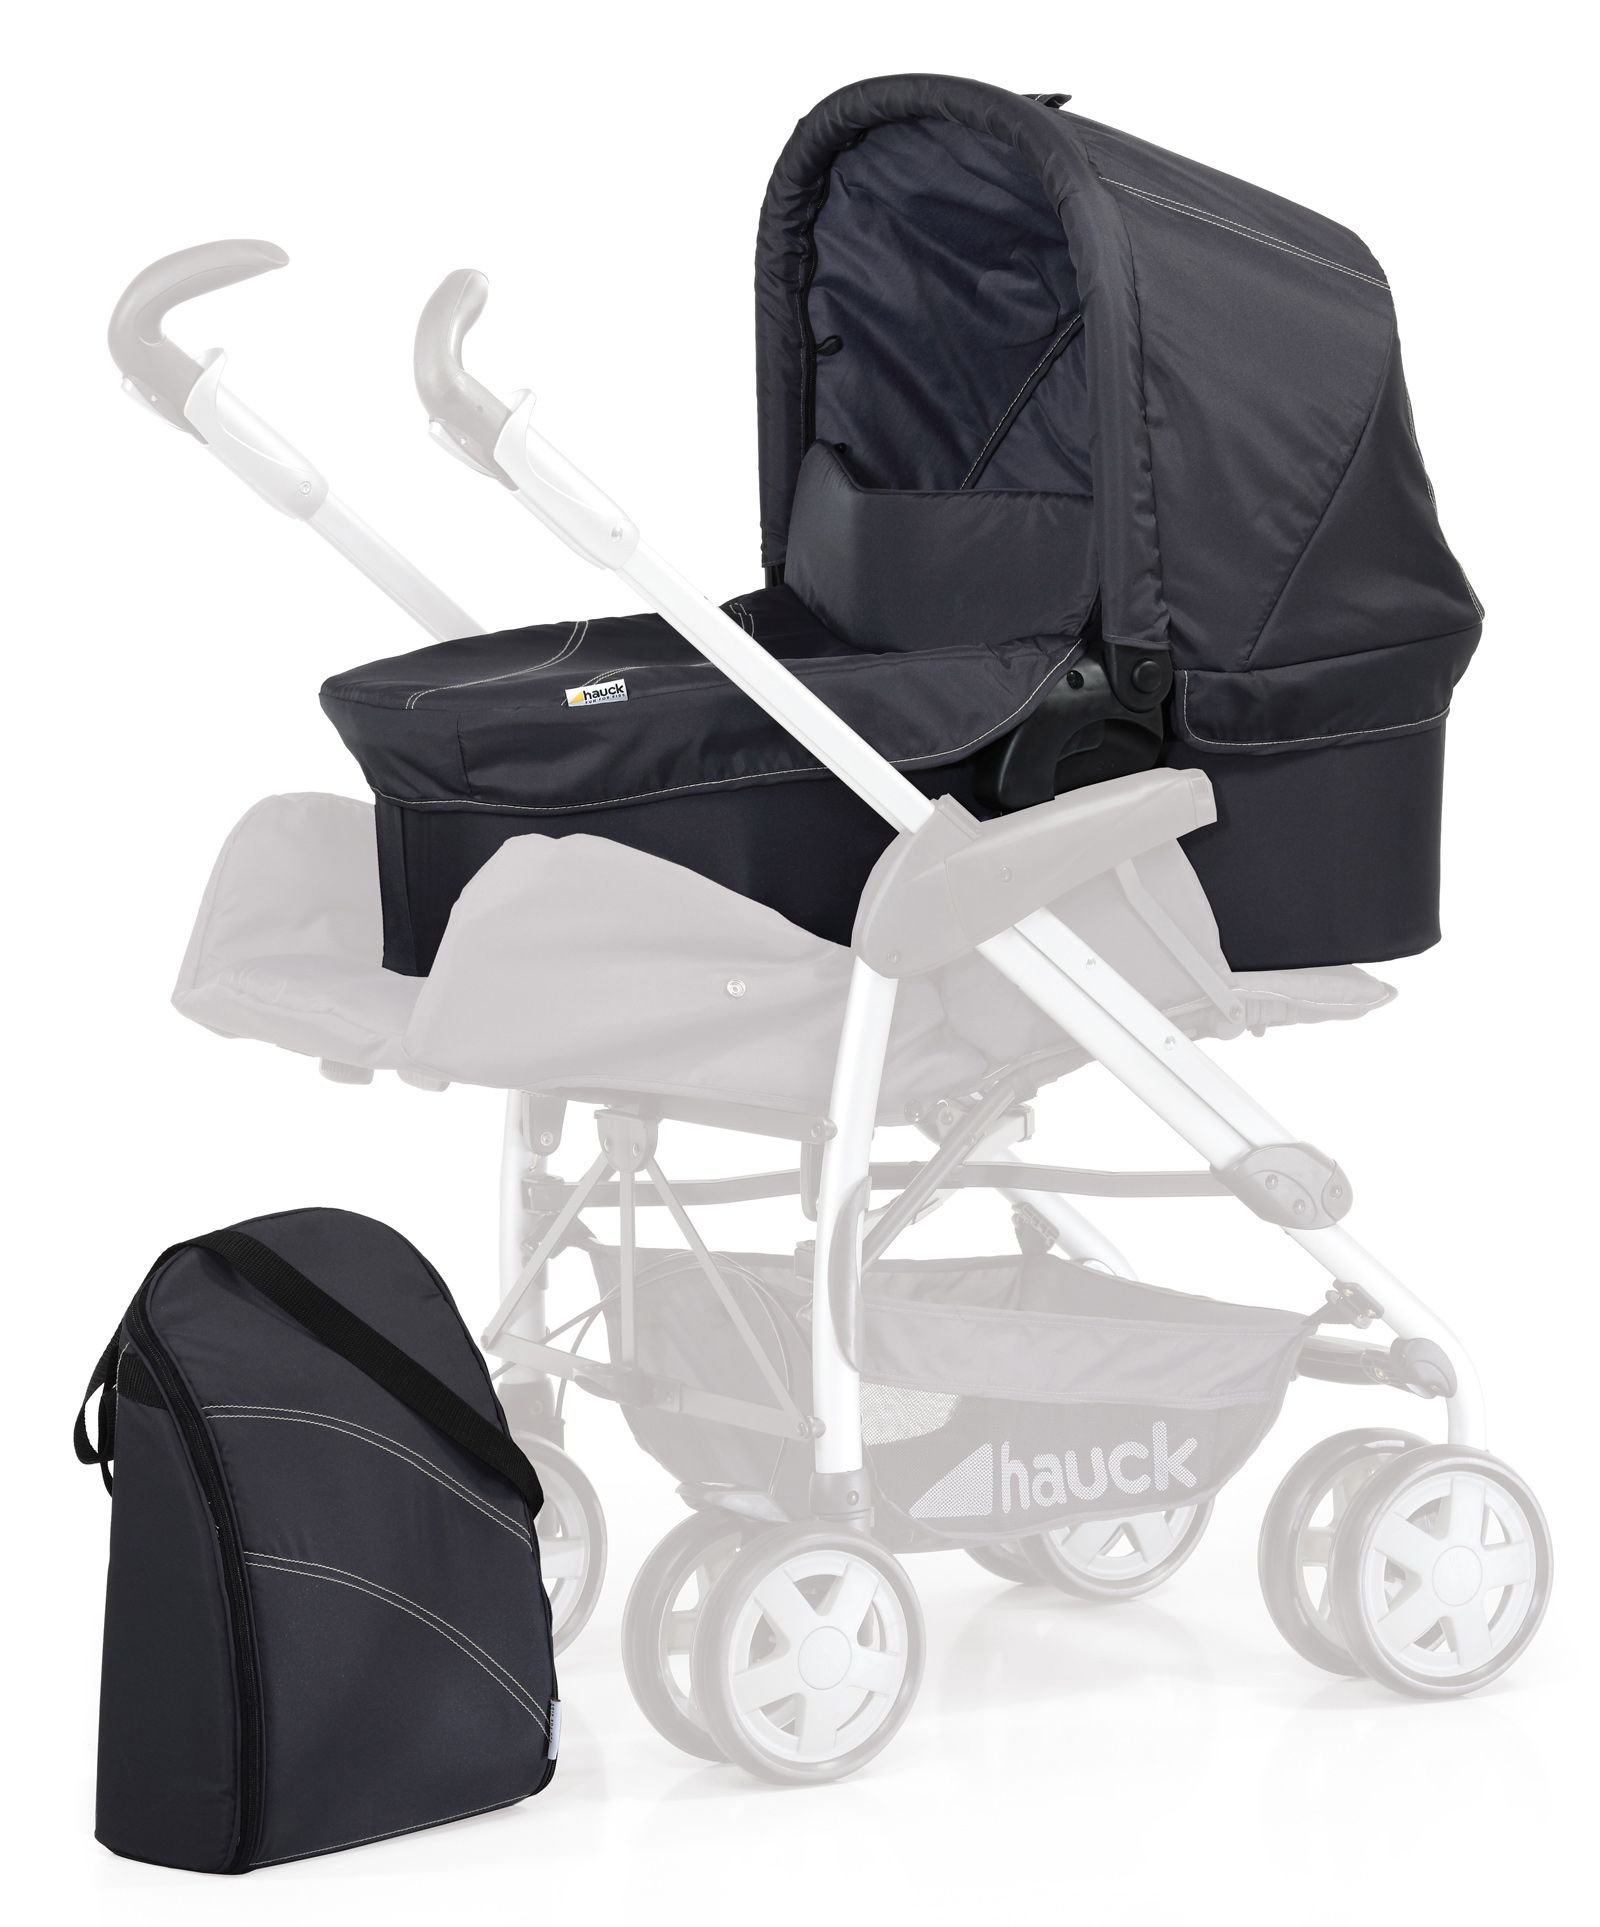 Hauck - Bassinet And Diaper Changing Bag